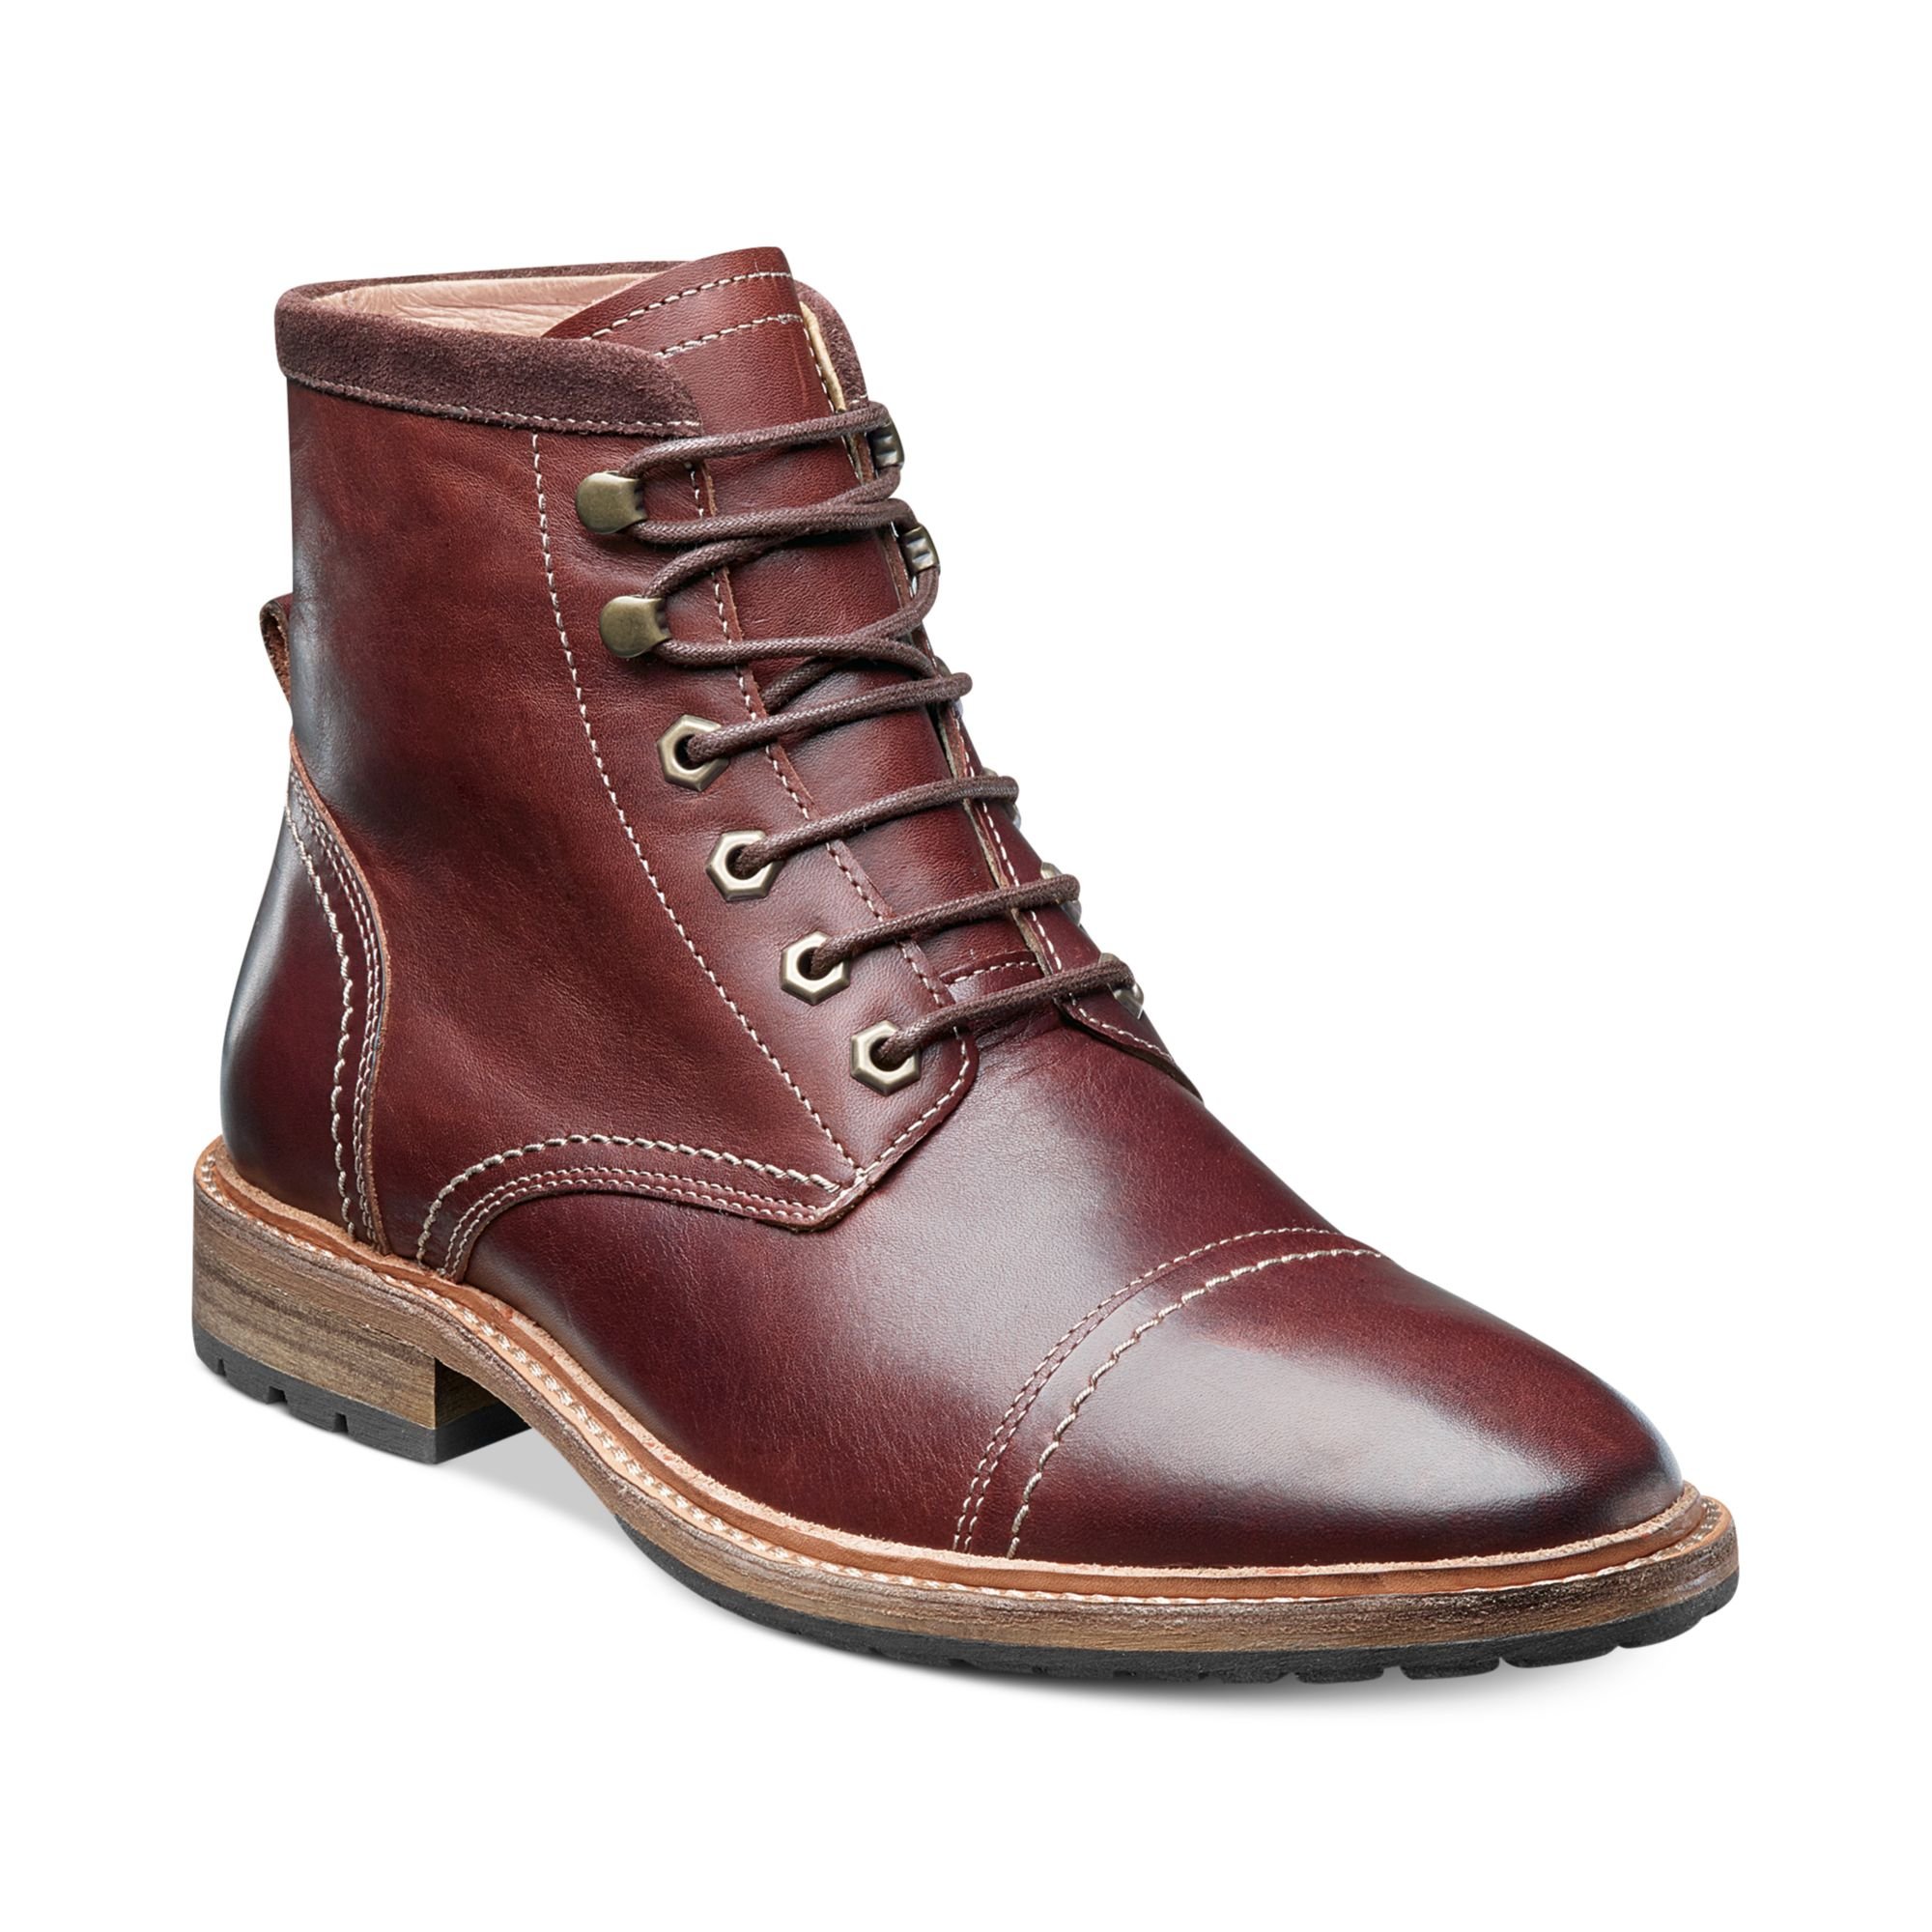 Lyst - Florsheim Indie Laceup Cap Toe Boots in Brown for Men